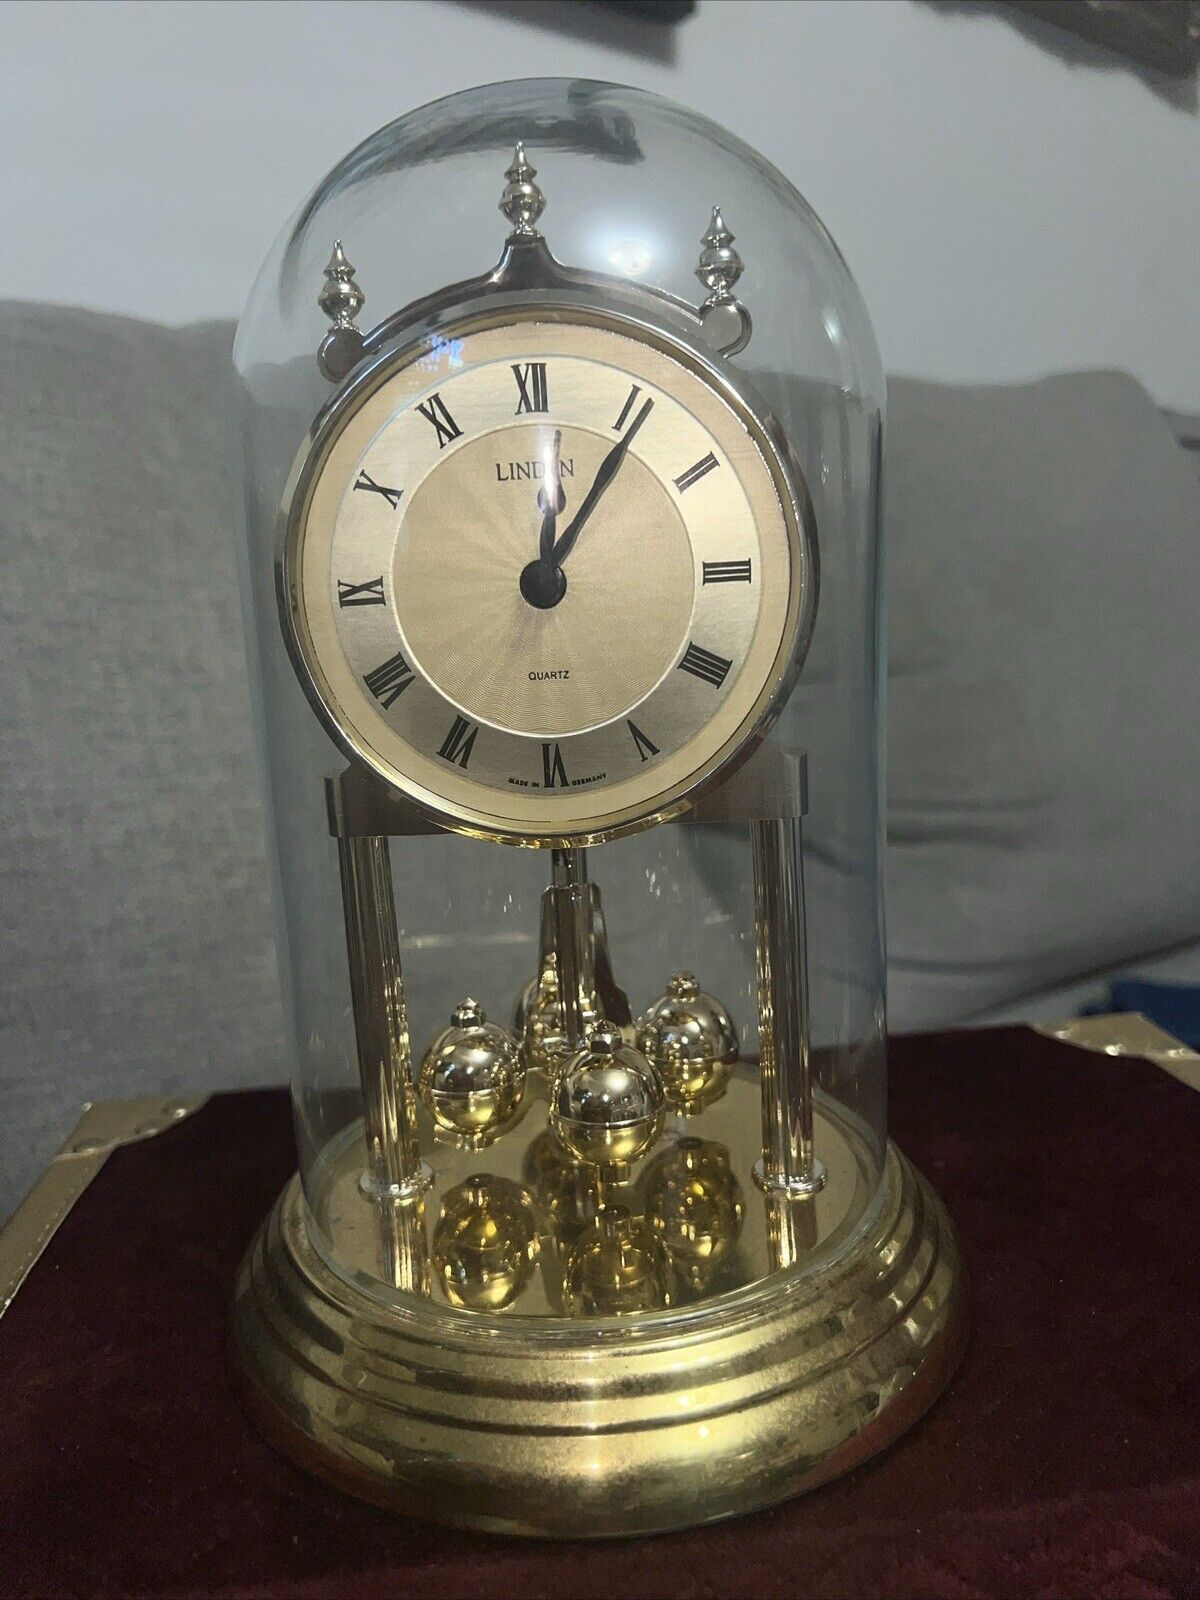 Vintage Linden German Anniversary Glass Dome Clock AA Not Included Works Great